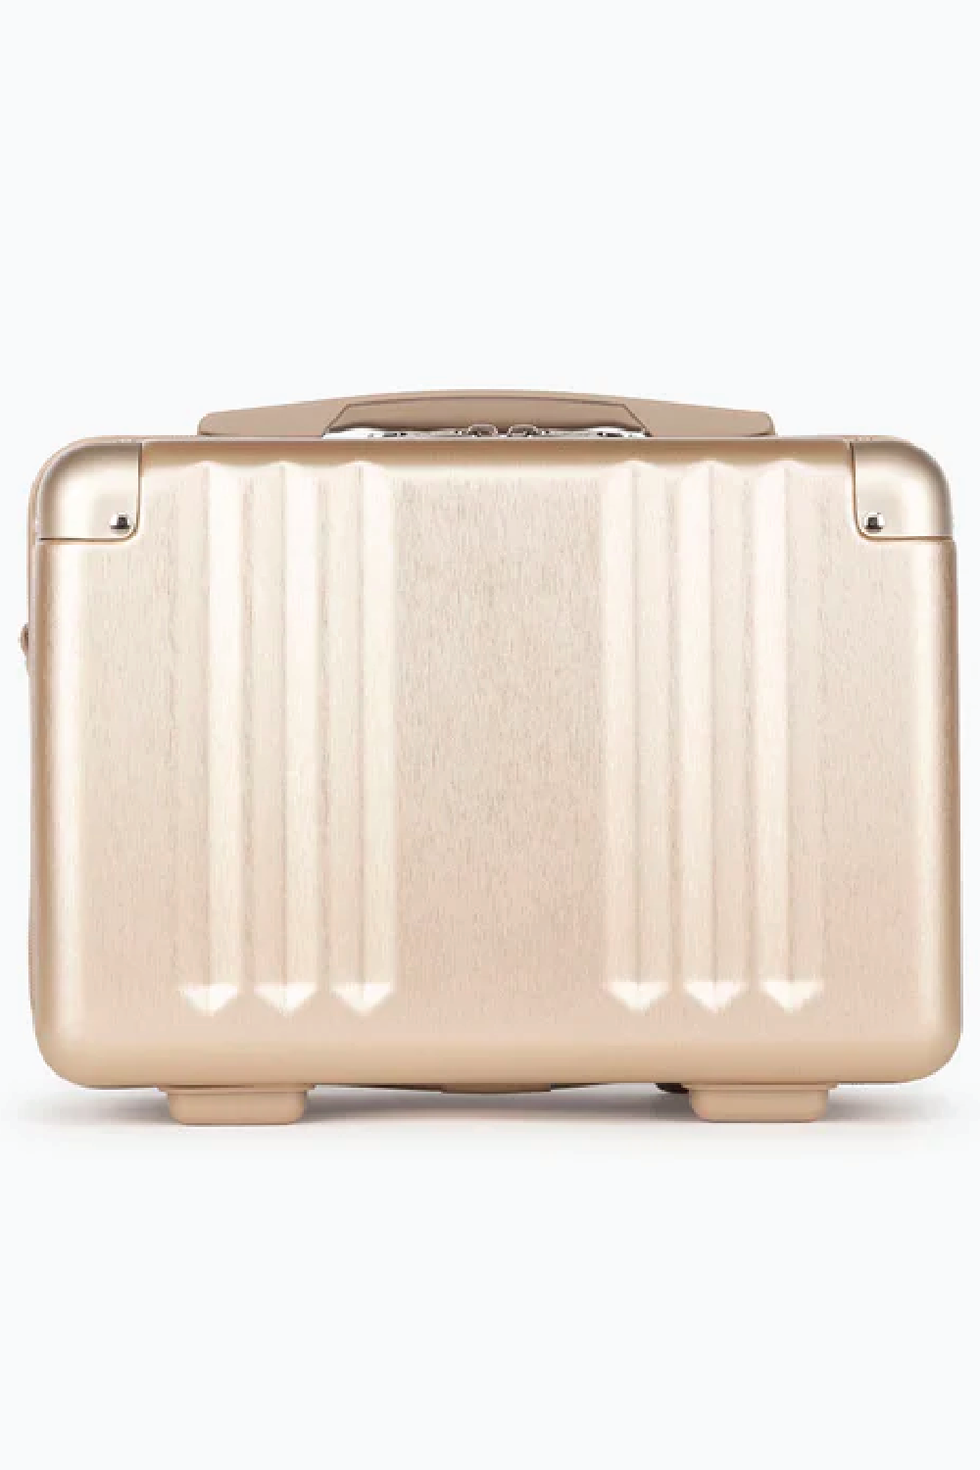 Make up Case vintage hard shell vanity Case luggage box container with tray